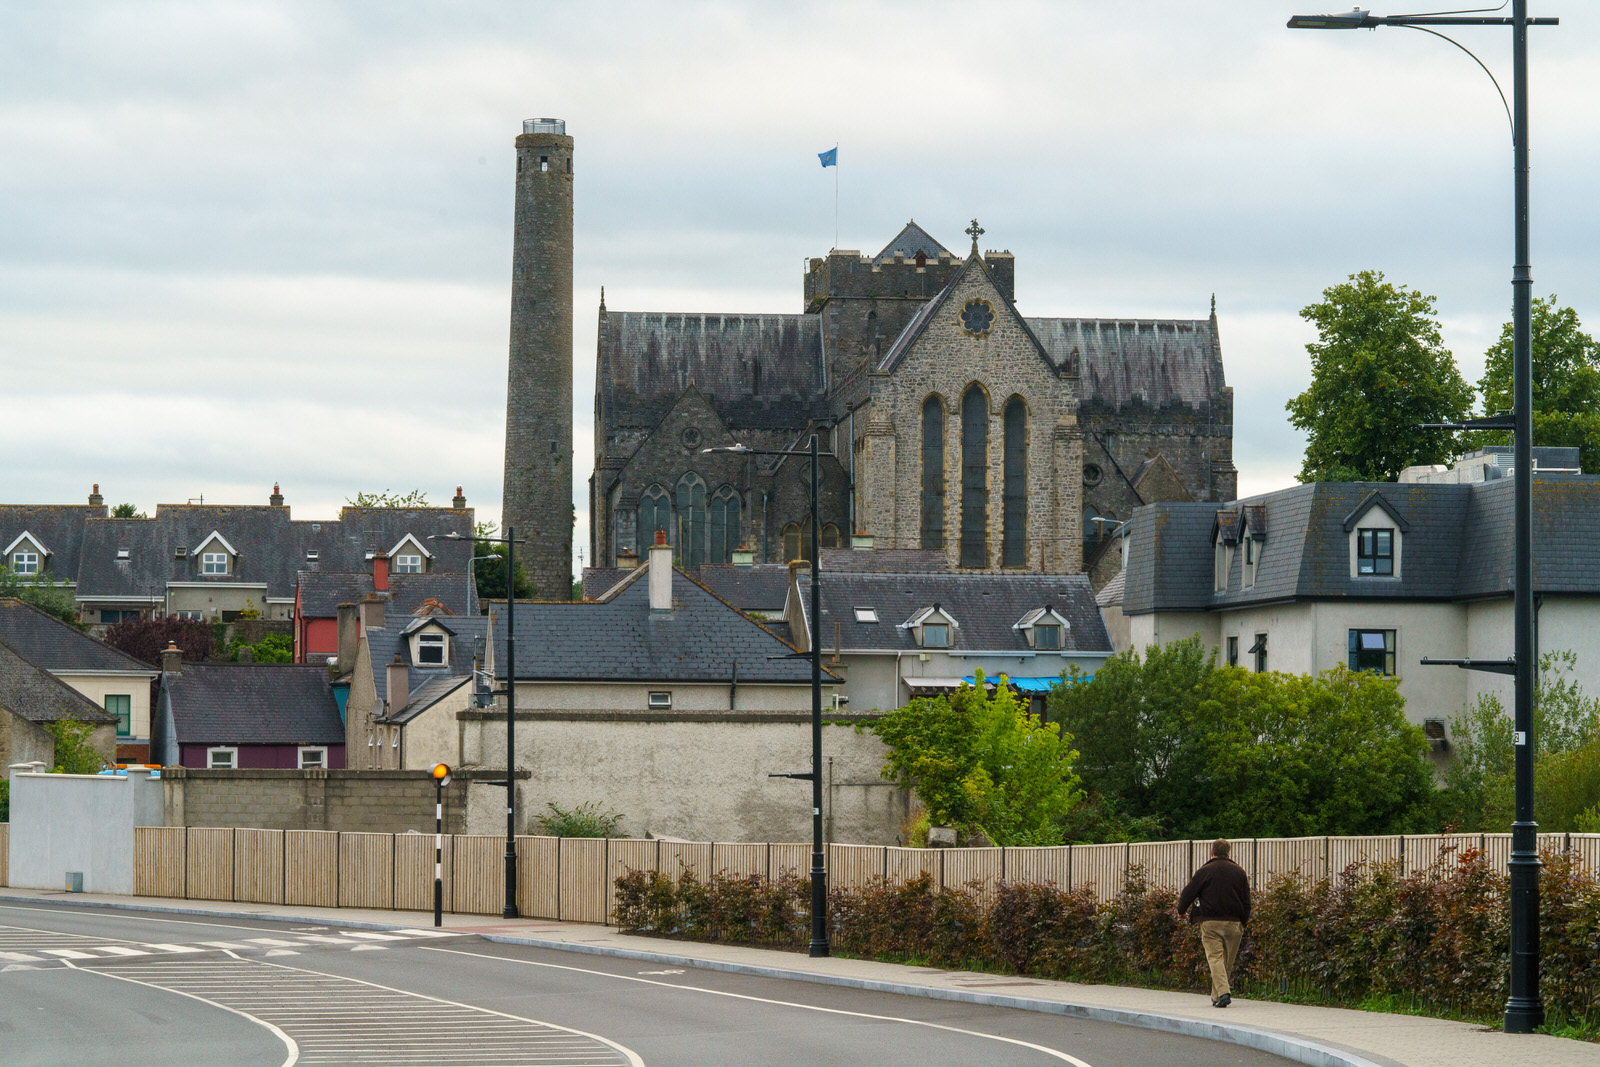 THE NEW ST FRANCIS BRIDGE IN KILKENNY AND THE SURROUNDING AREA [OPENED TO THE PUBLIC IN 2017]-227042-1